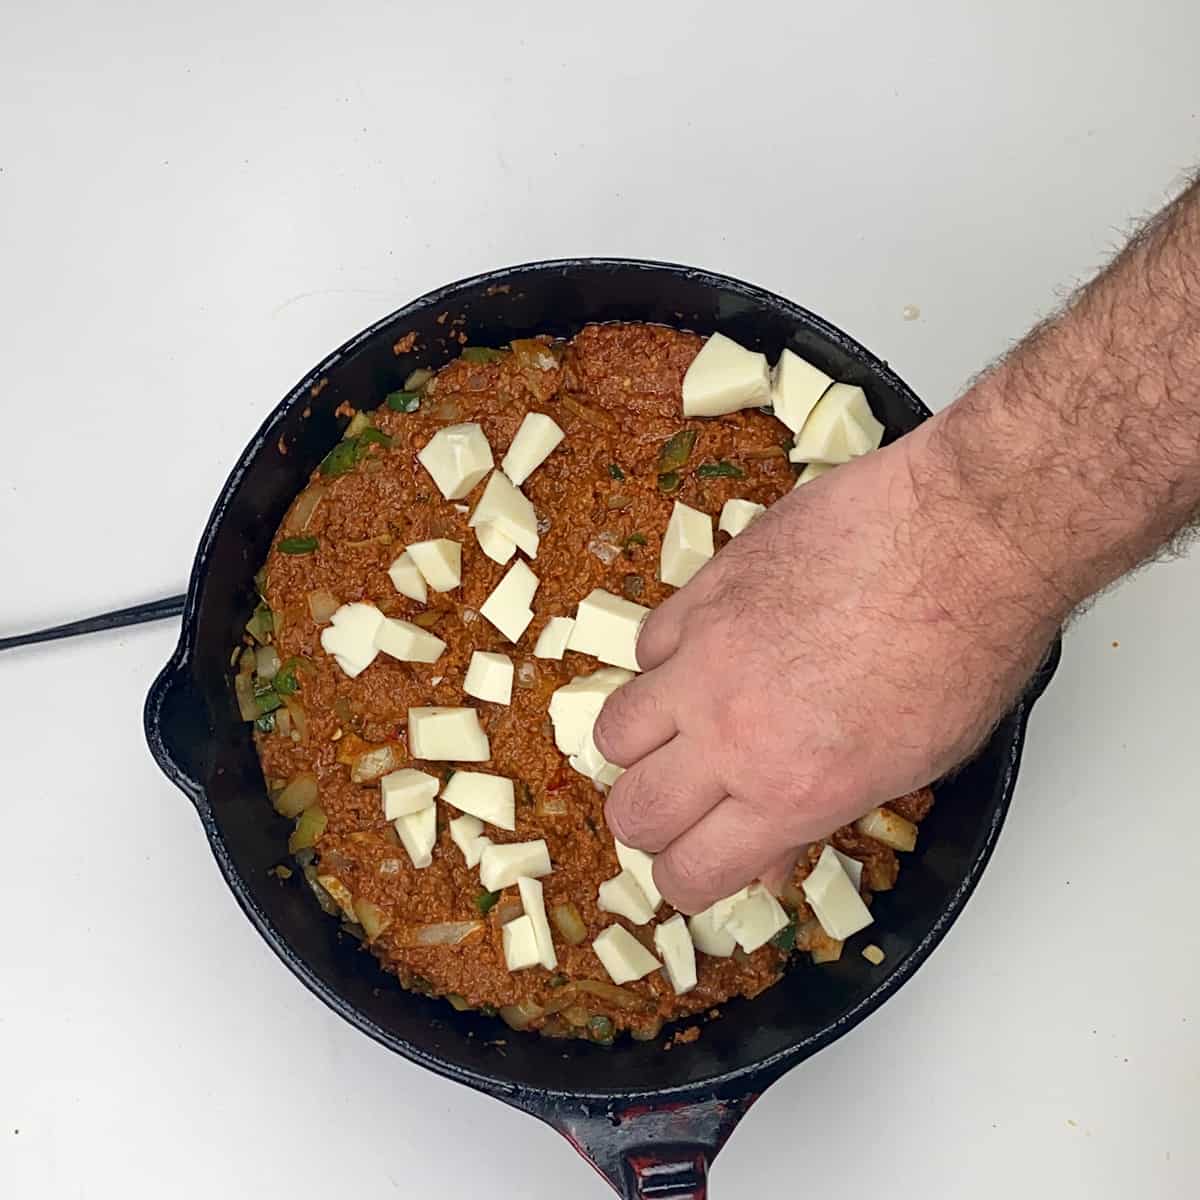 A hand over the cast iron skillet dropping in Oaxaca chese.